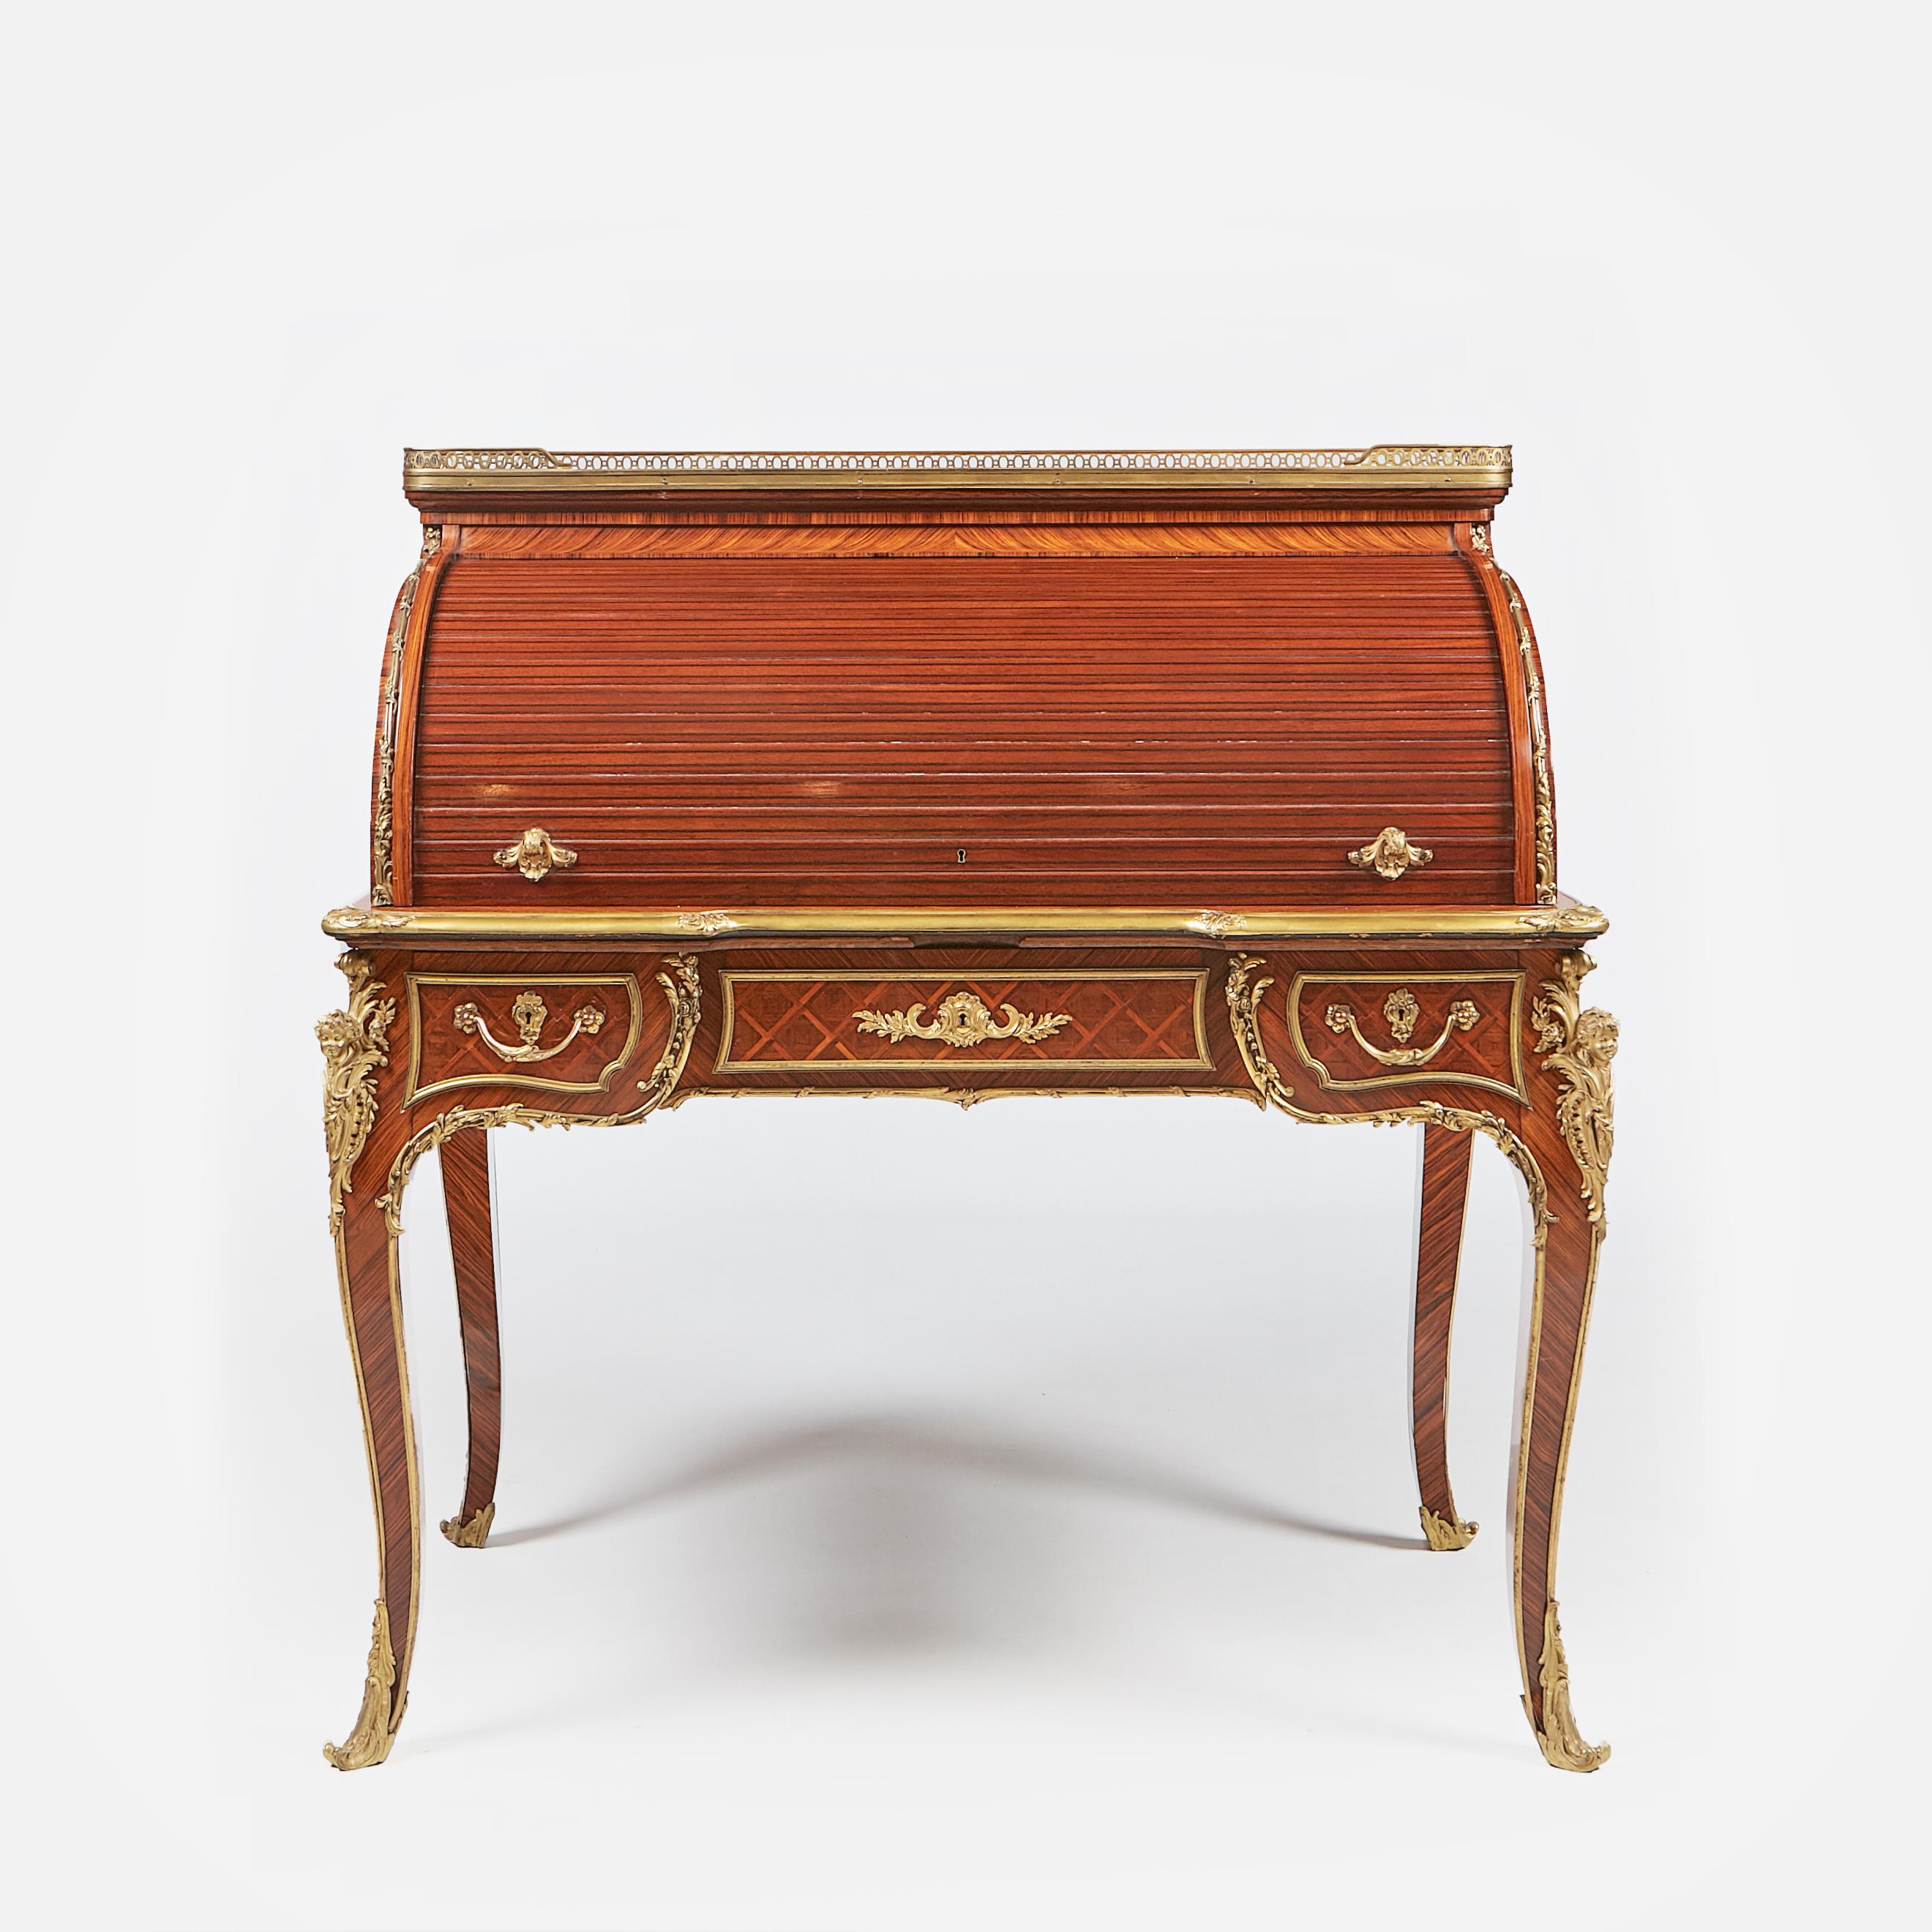 A stunning late 19th century kingwood, parquetry and ormolu mounted Louis XVI style Bureau à Cylindre attributed to Francoise Linke, the alabastro a pecorella marble top above a tambour enclosing an interior fitted with a shelf and four drawers